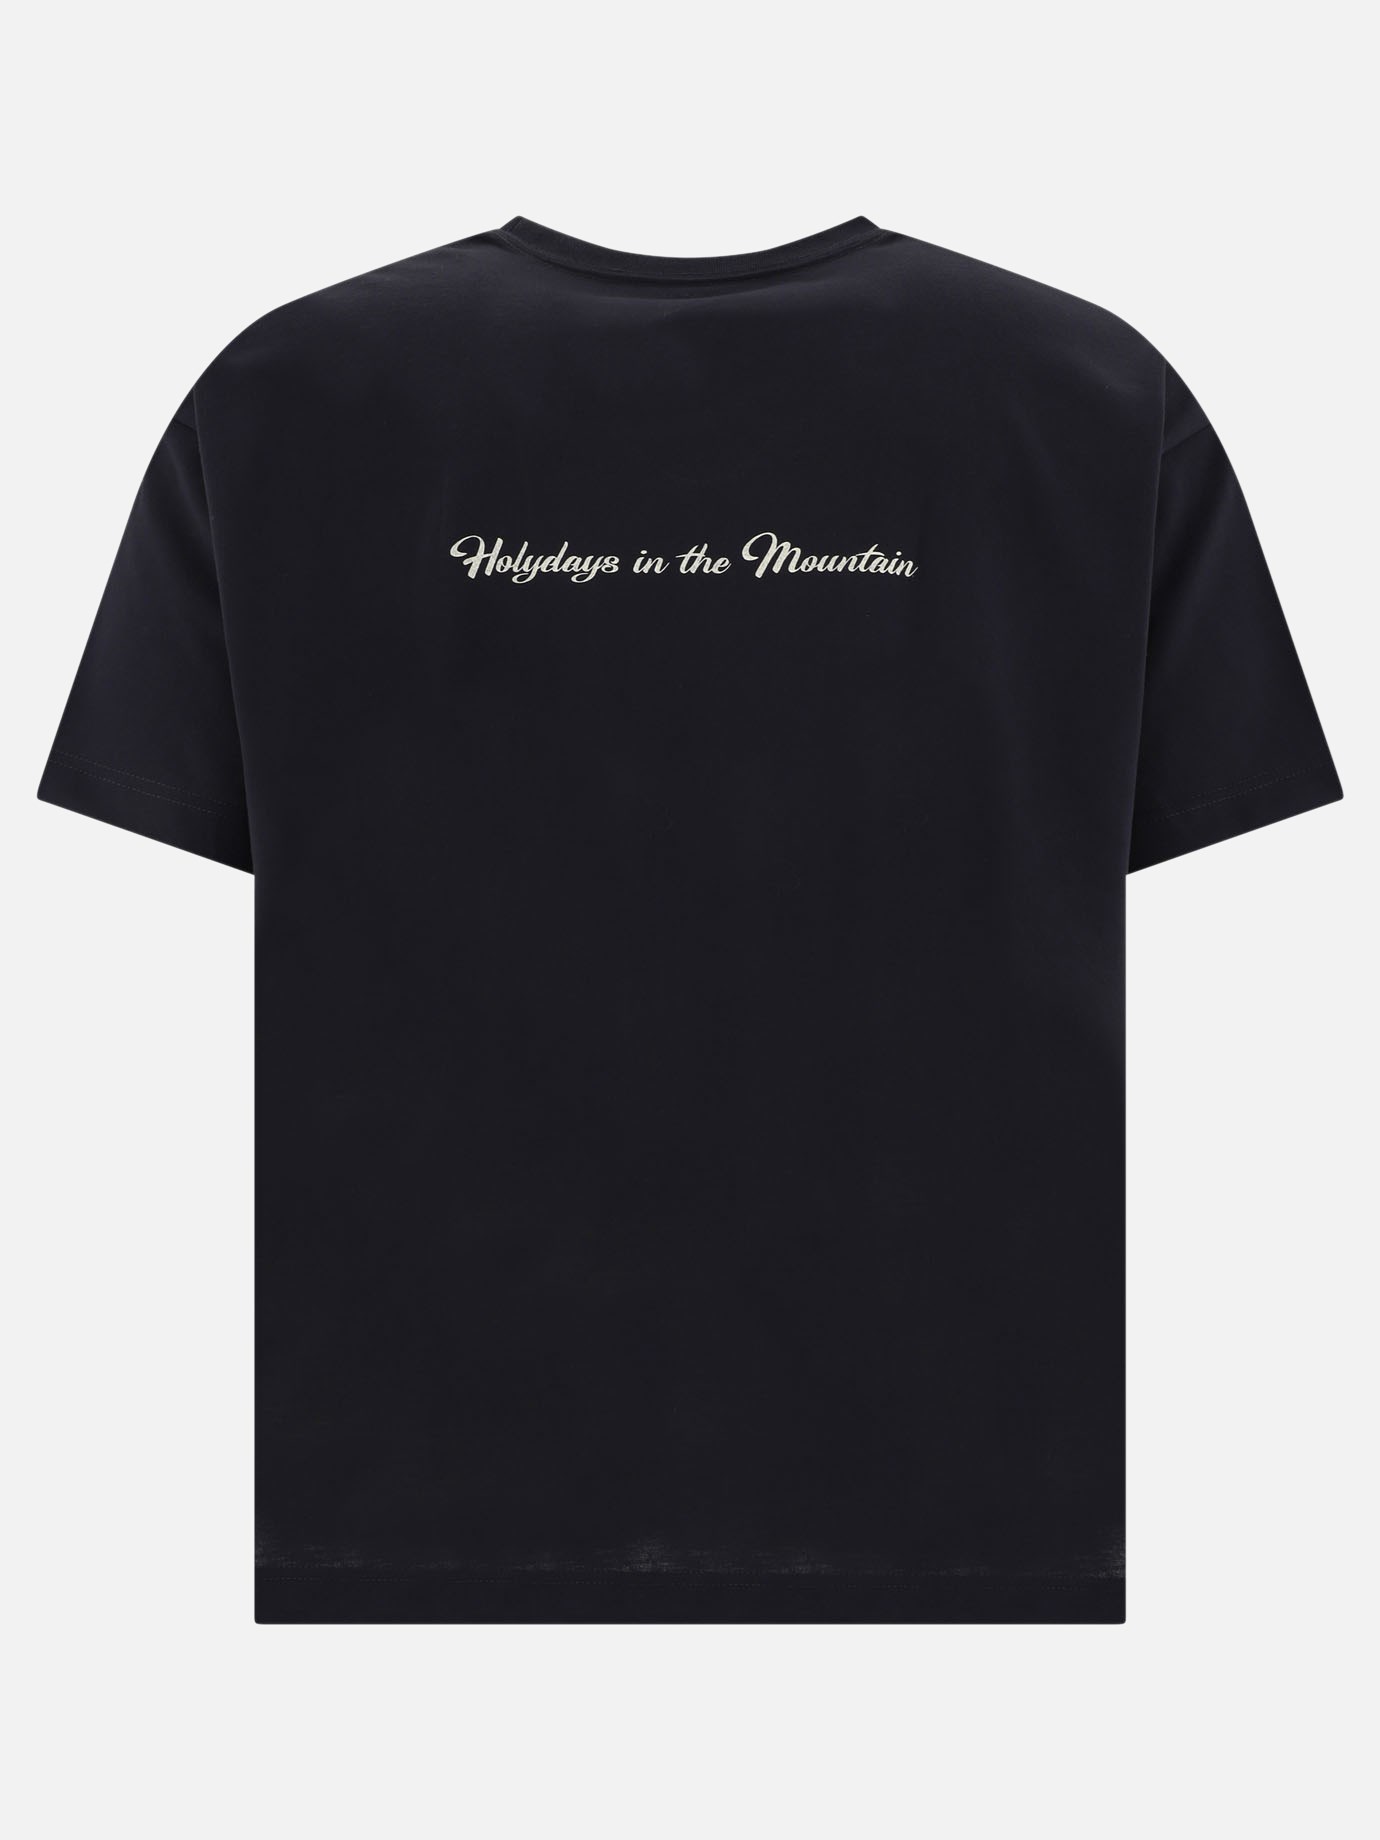 T-shirt  A  by Mountain Research